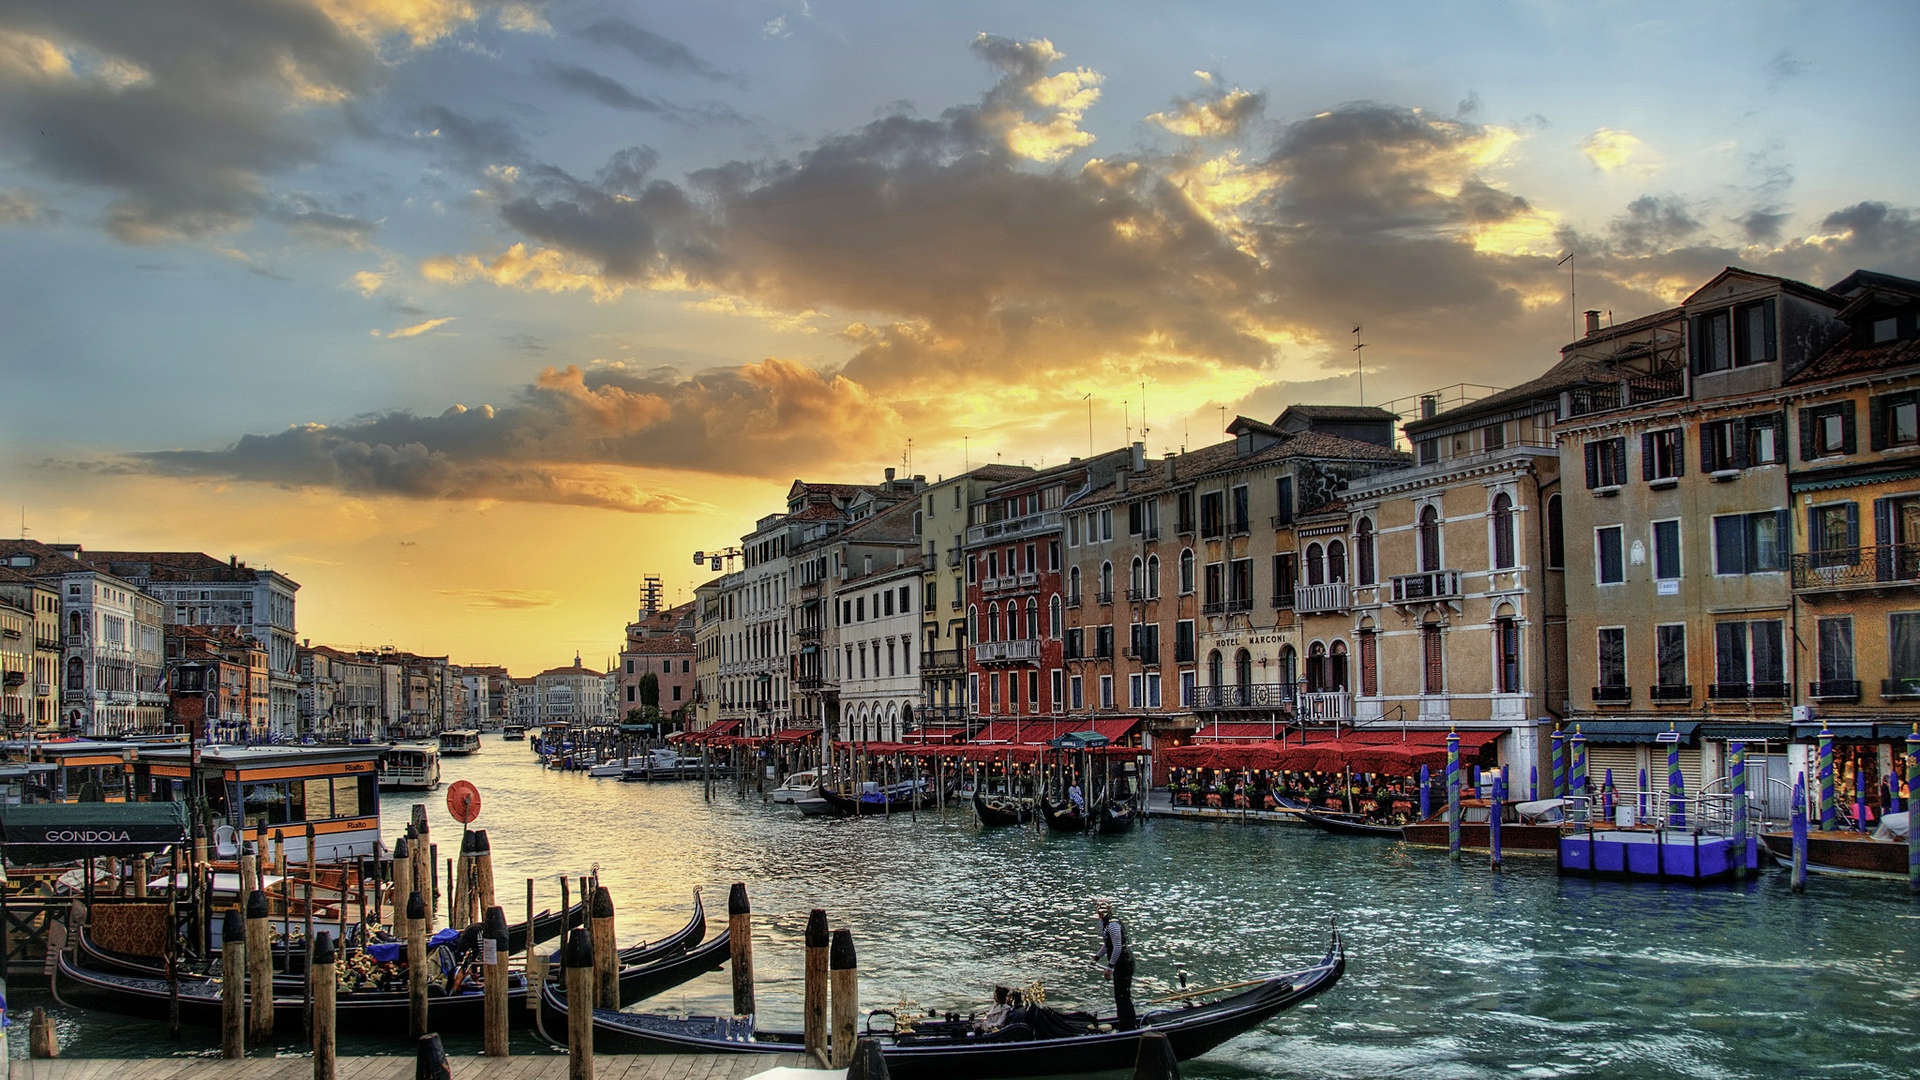 Download wallpaper 1920x1080 italy venice houses canal hdr 1920x1080